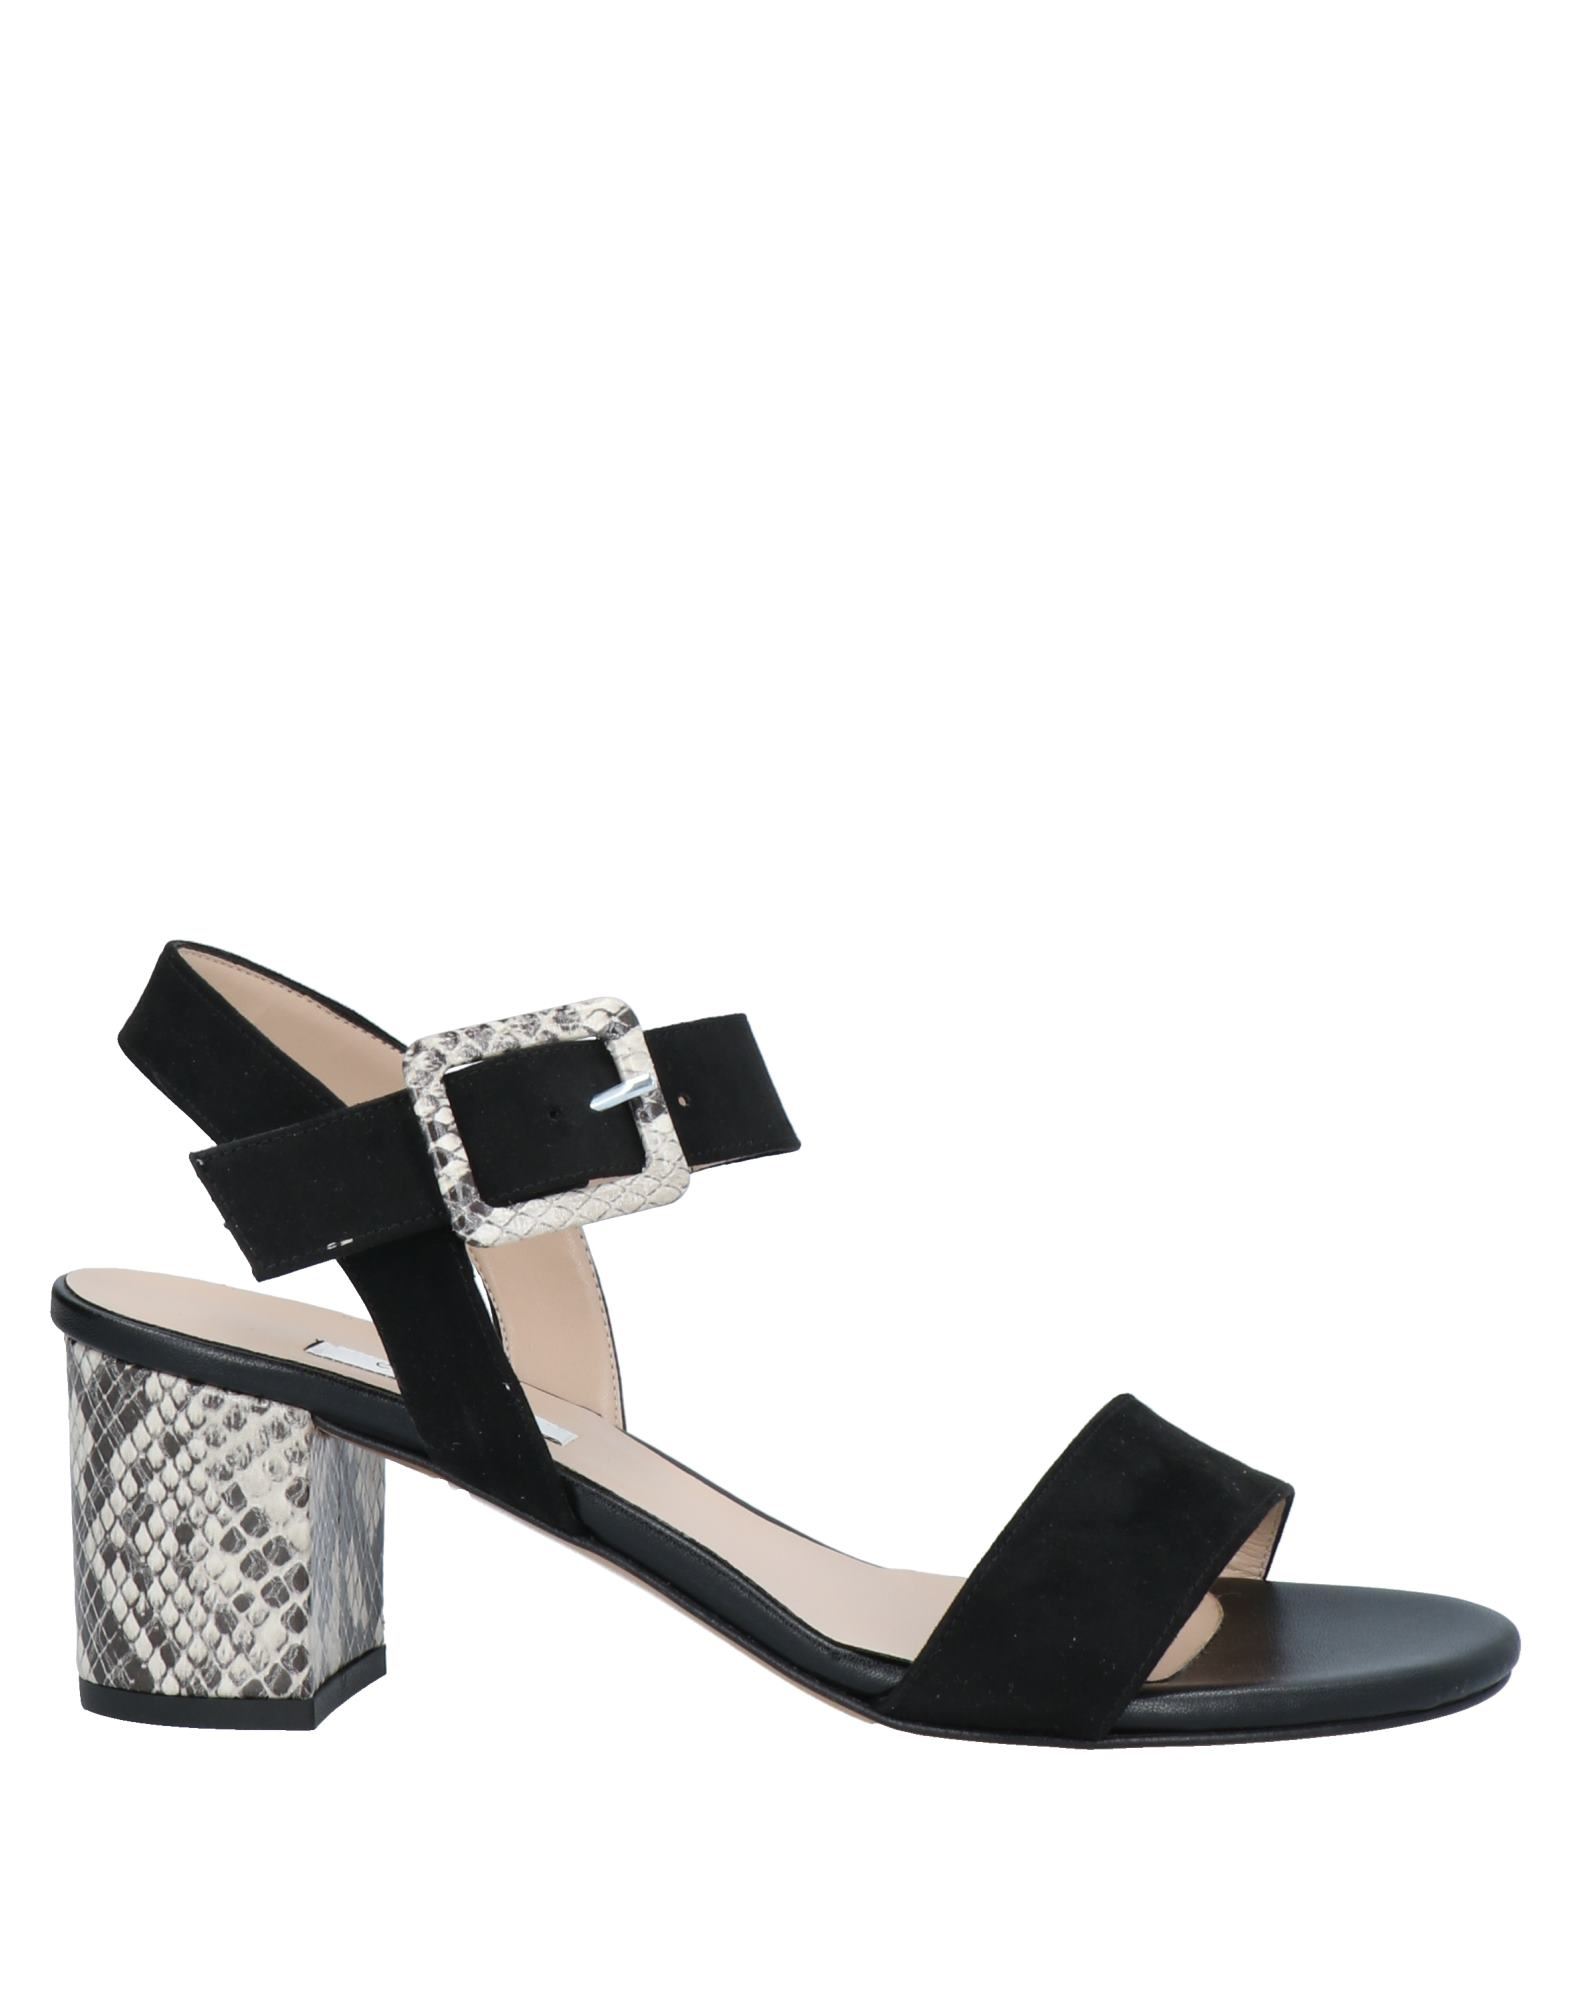 L'amour By Albano Sandals In Black